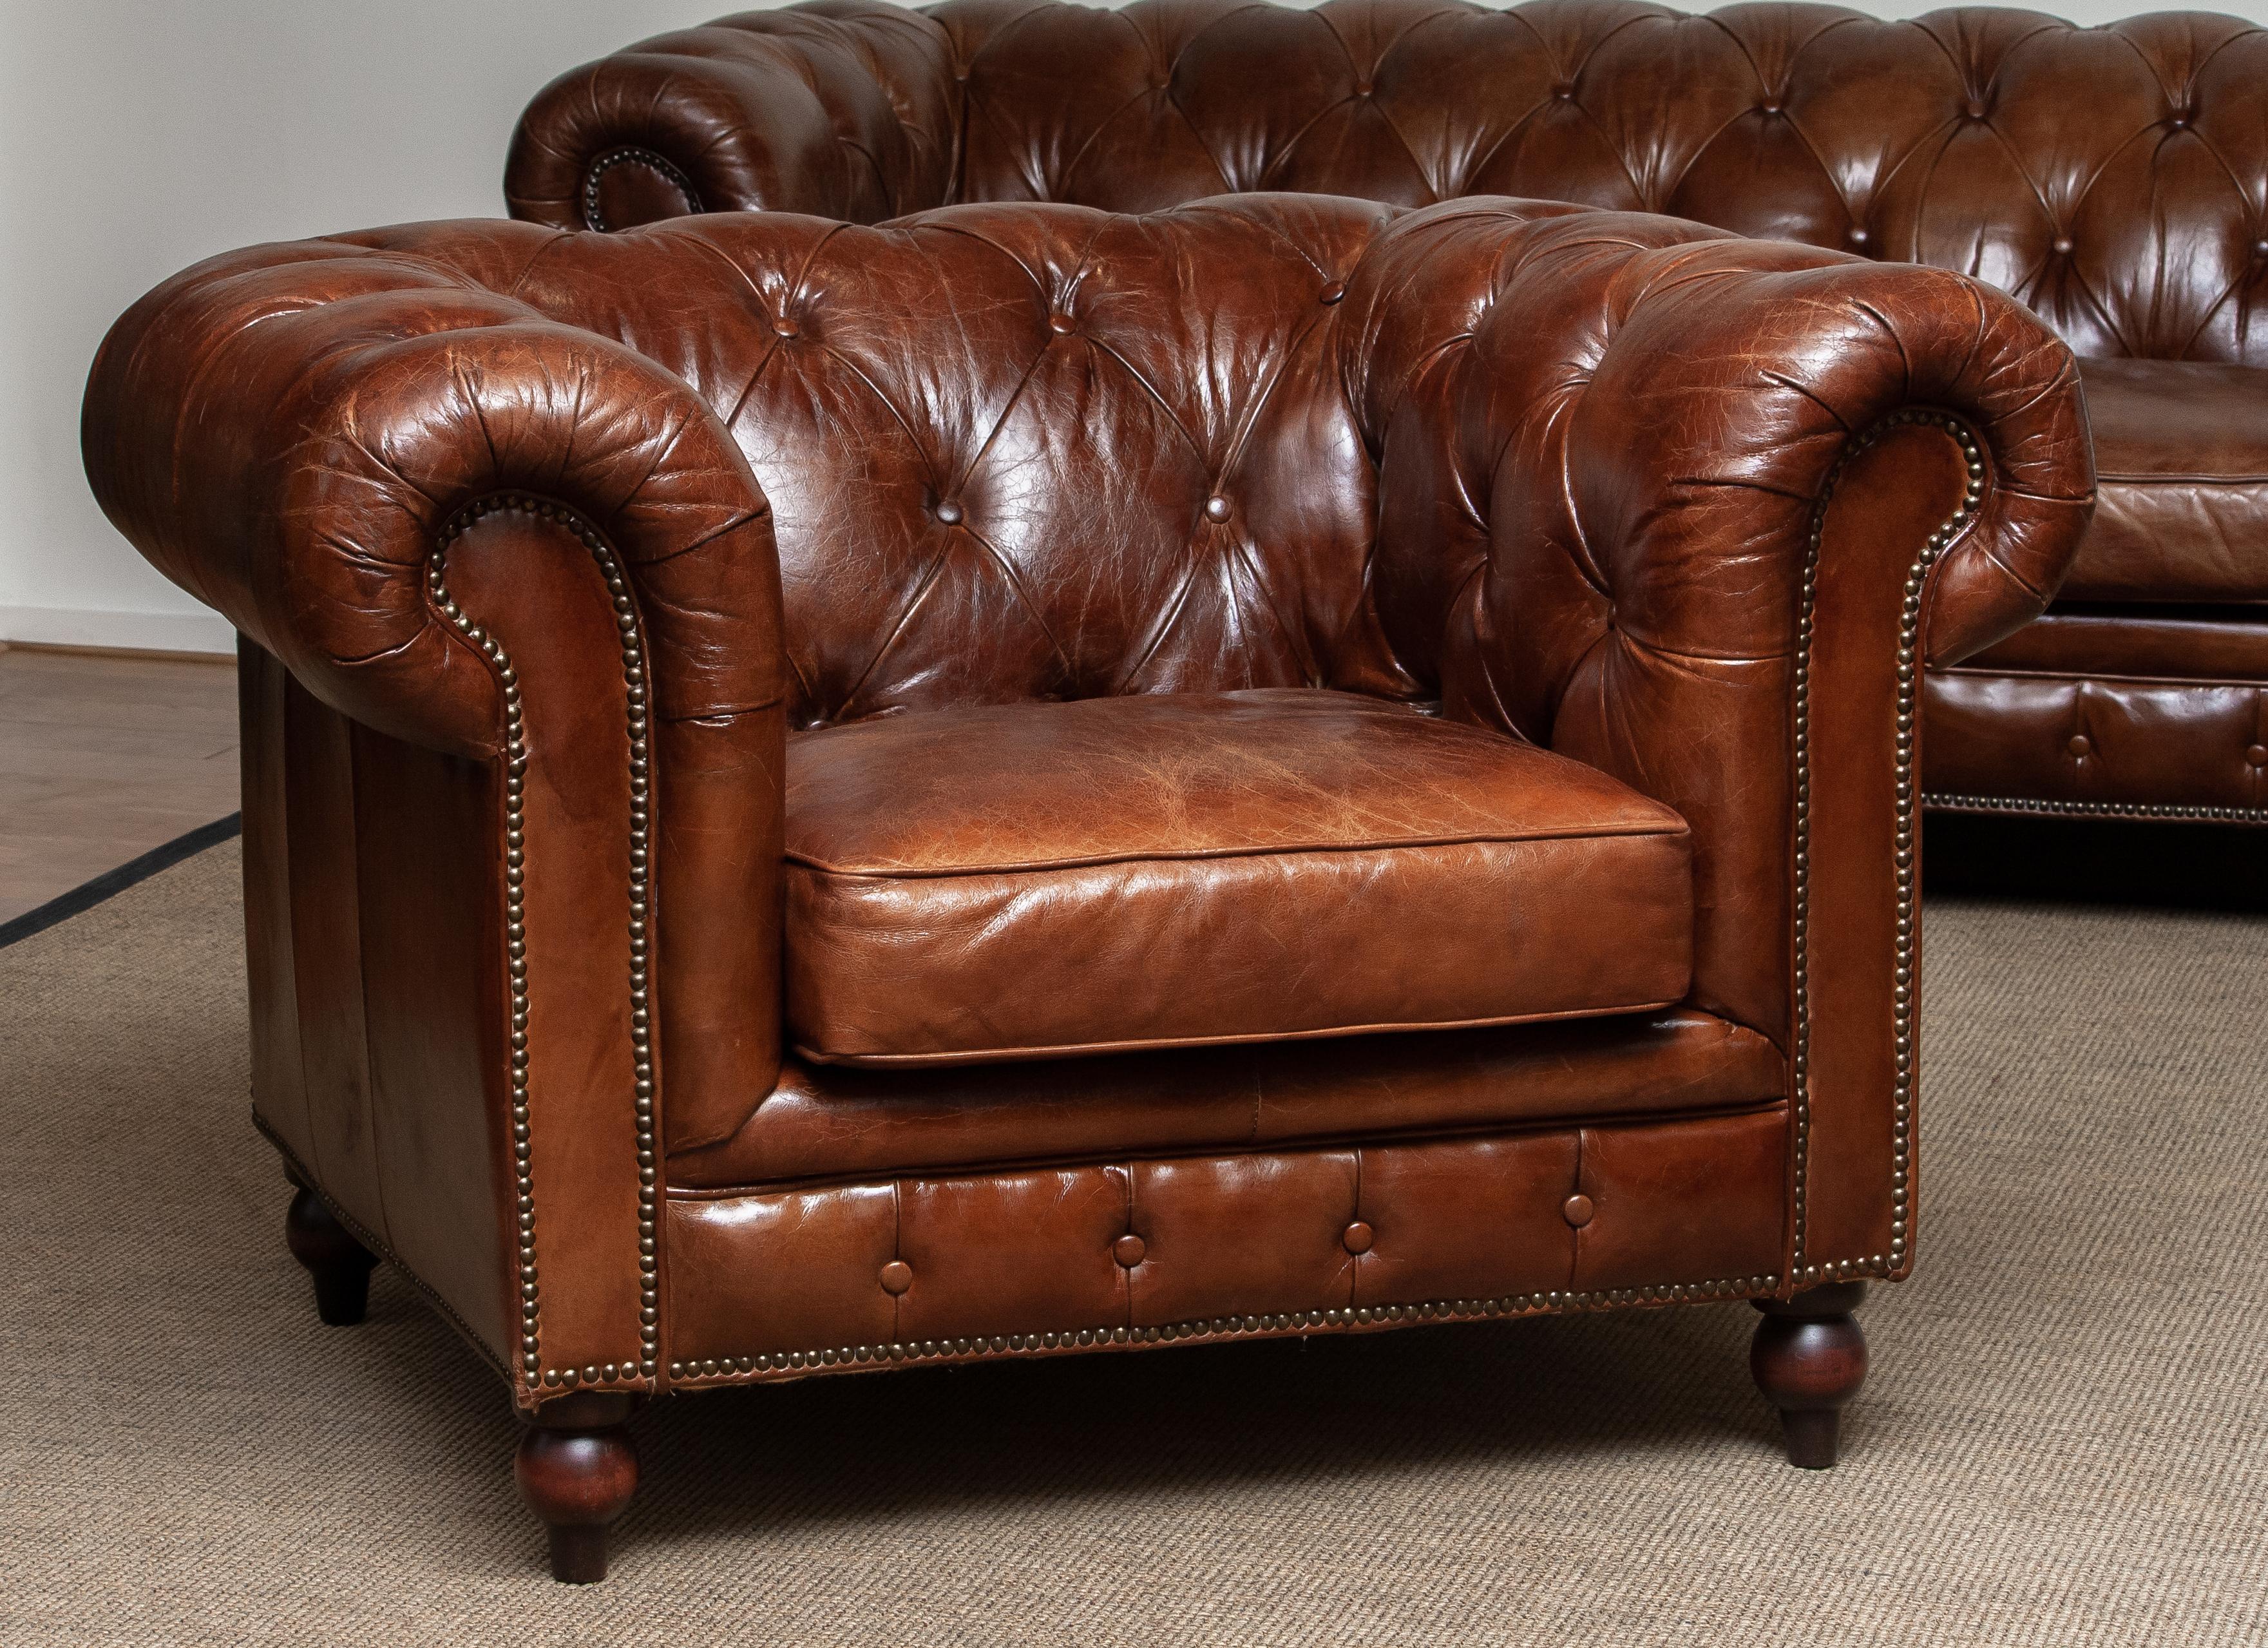 English Tufted Brown Leather Chesterfield Sofa and Arm / Lounge Chair